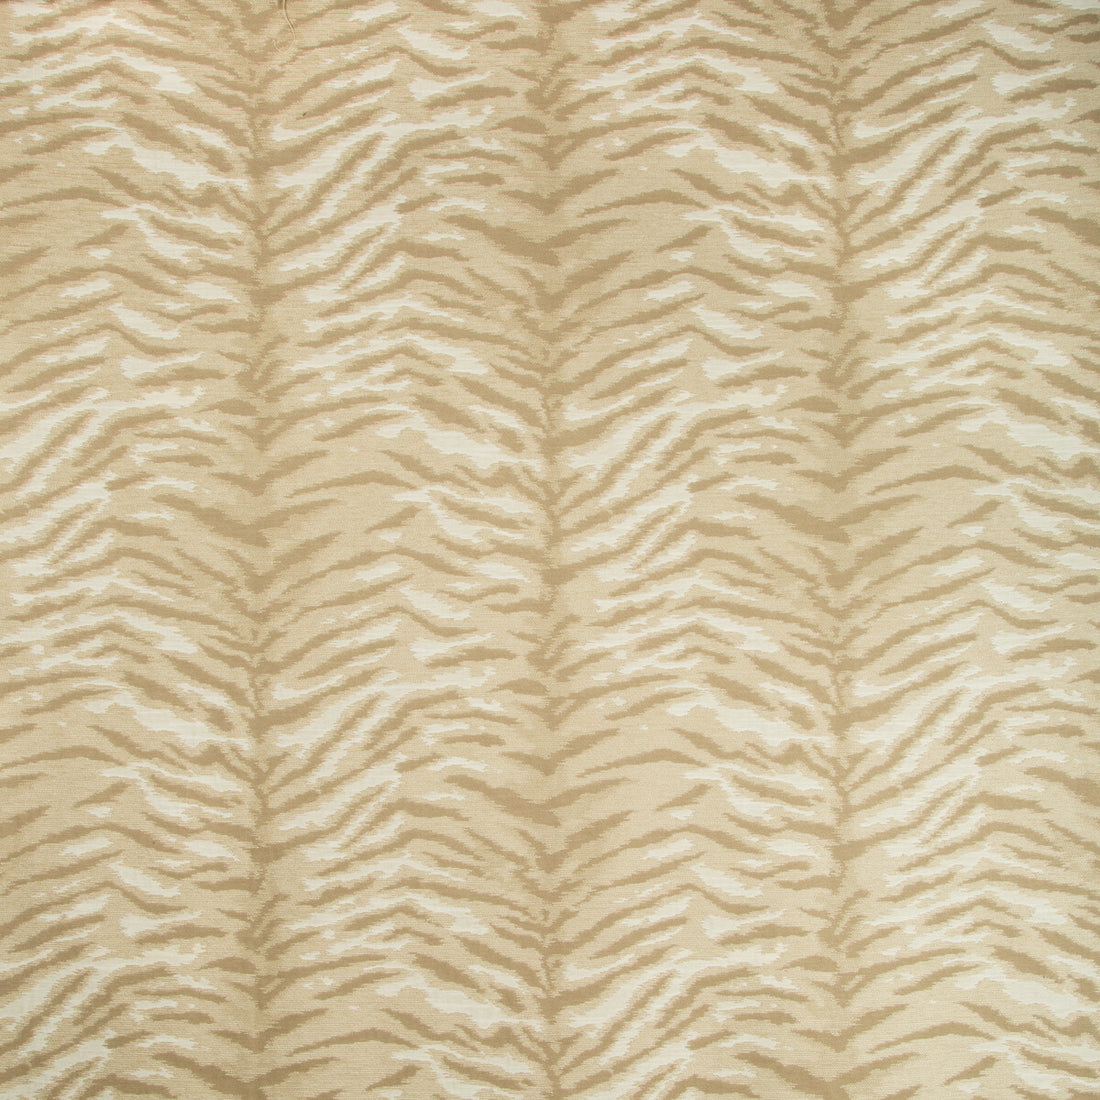 Kravet Design fabric in 34997-16 color - pattern 34997.16.0 - by Kravet Design in the Performance Crypton Home collection